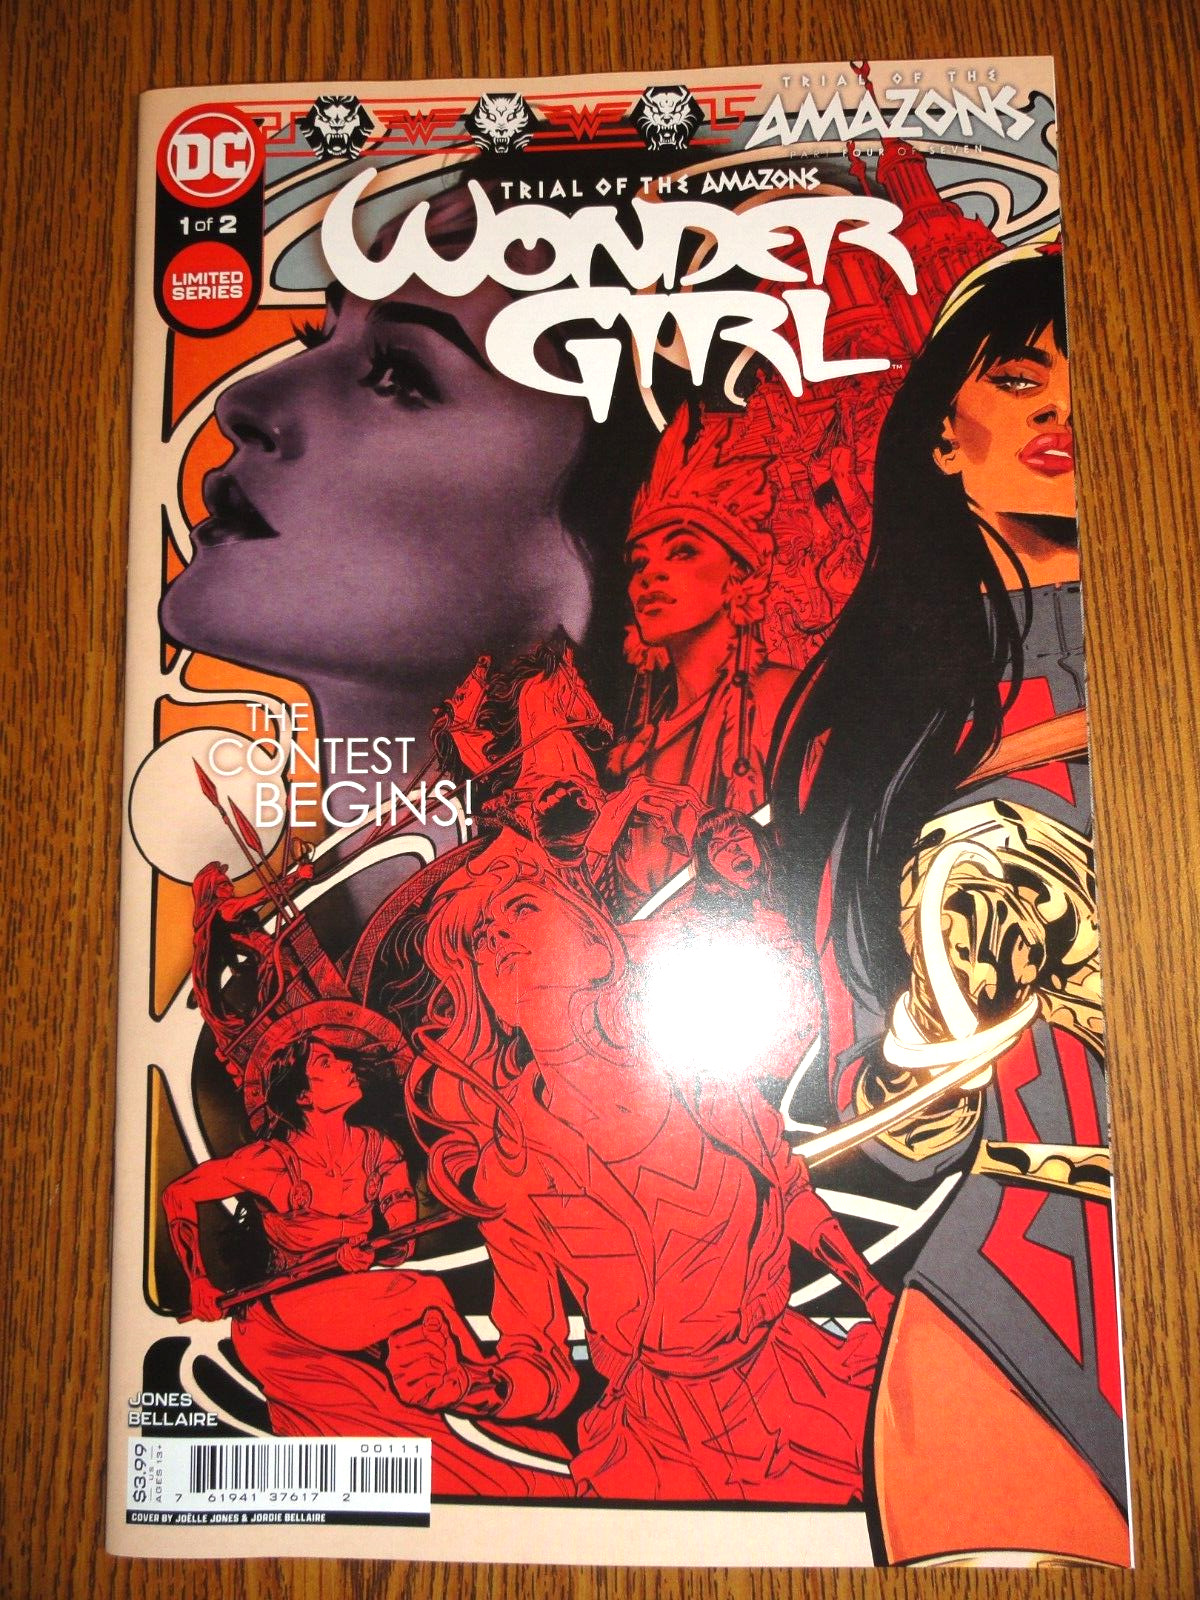 Trial of the Amazons: Wonder Girl #1 of 2 Yara Flor 1st Print Pt 4 of 7 Woman DC